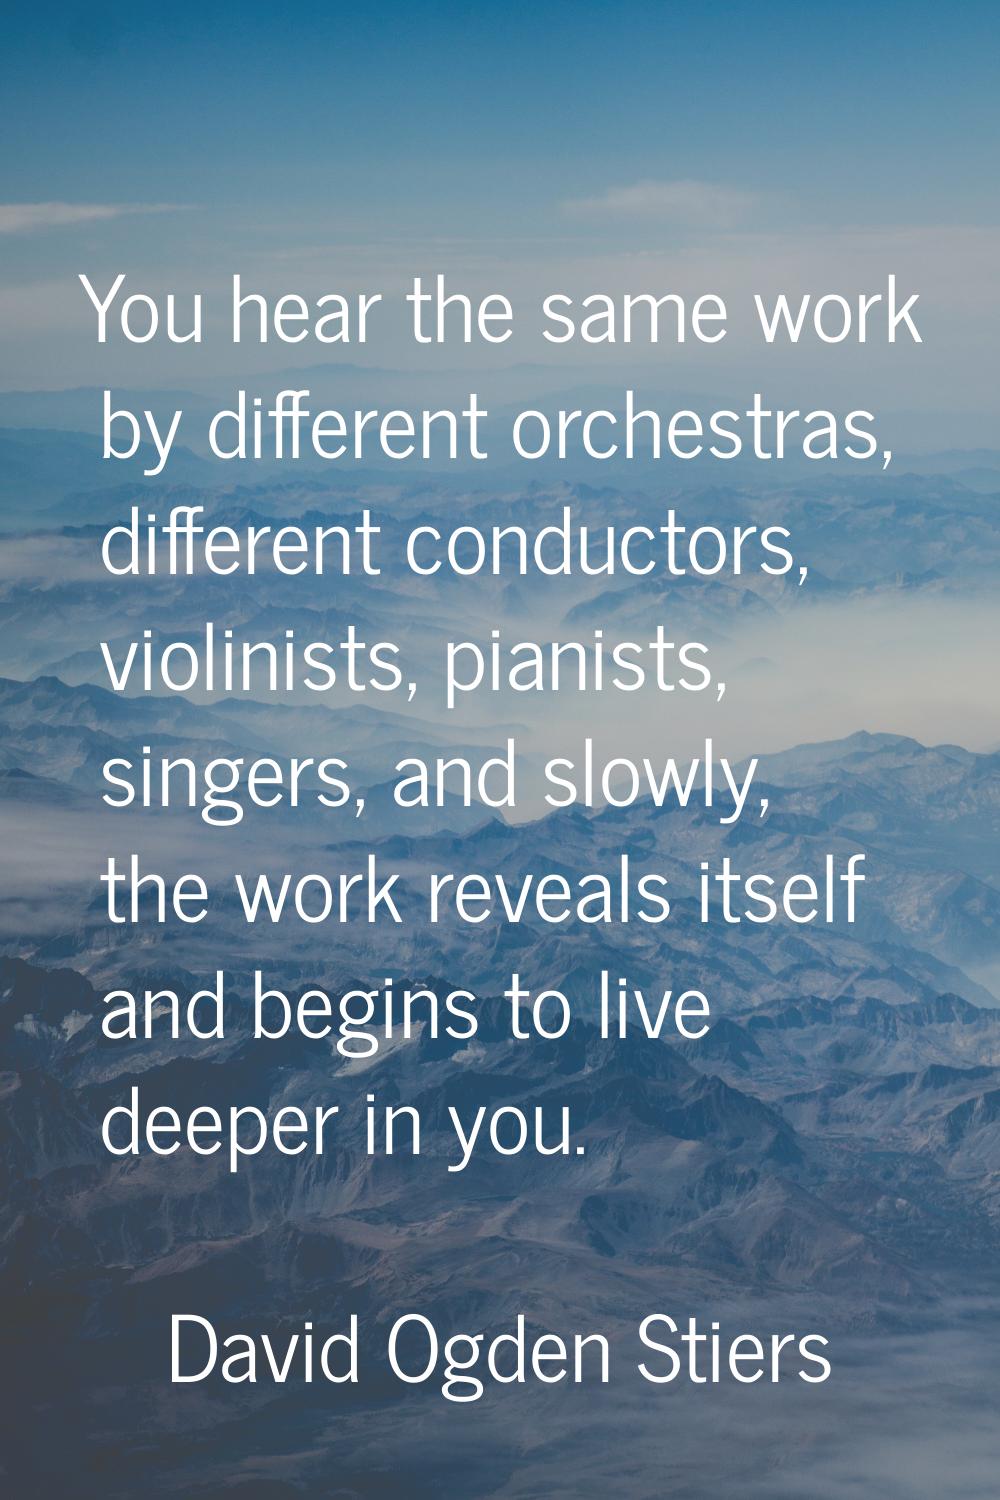 You hear the same work by different orchestras, different conductors, violinists, pianists, singers